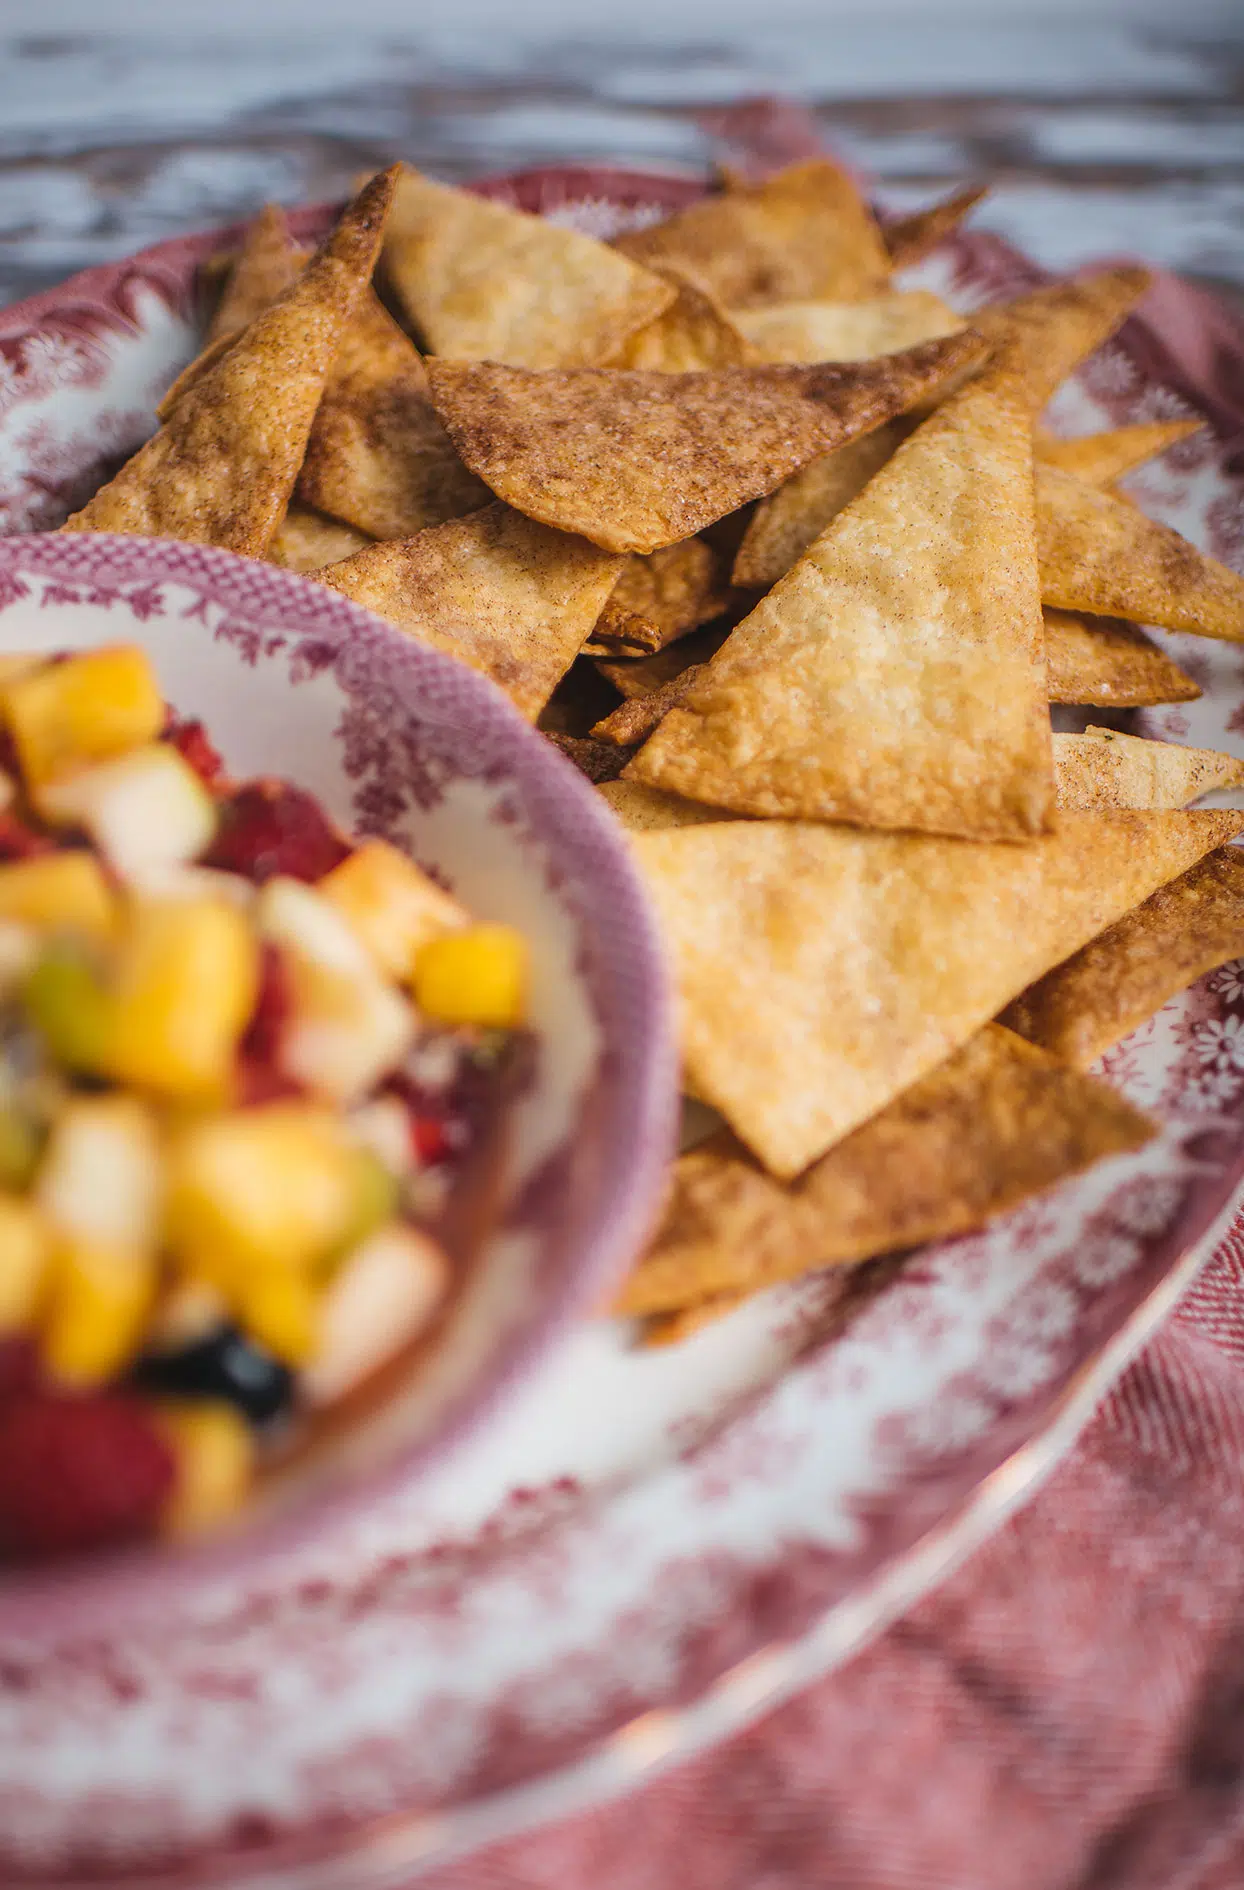 Cinnamon sweet tortilla chips with fruit salad